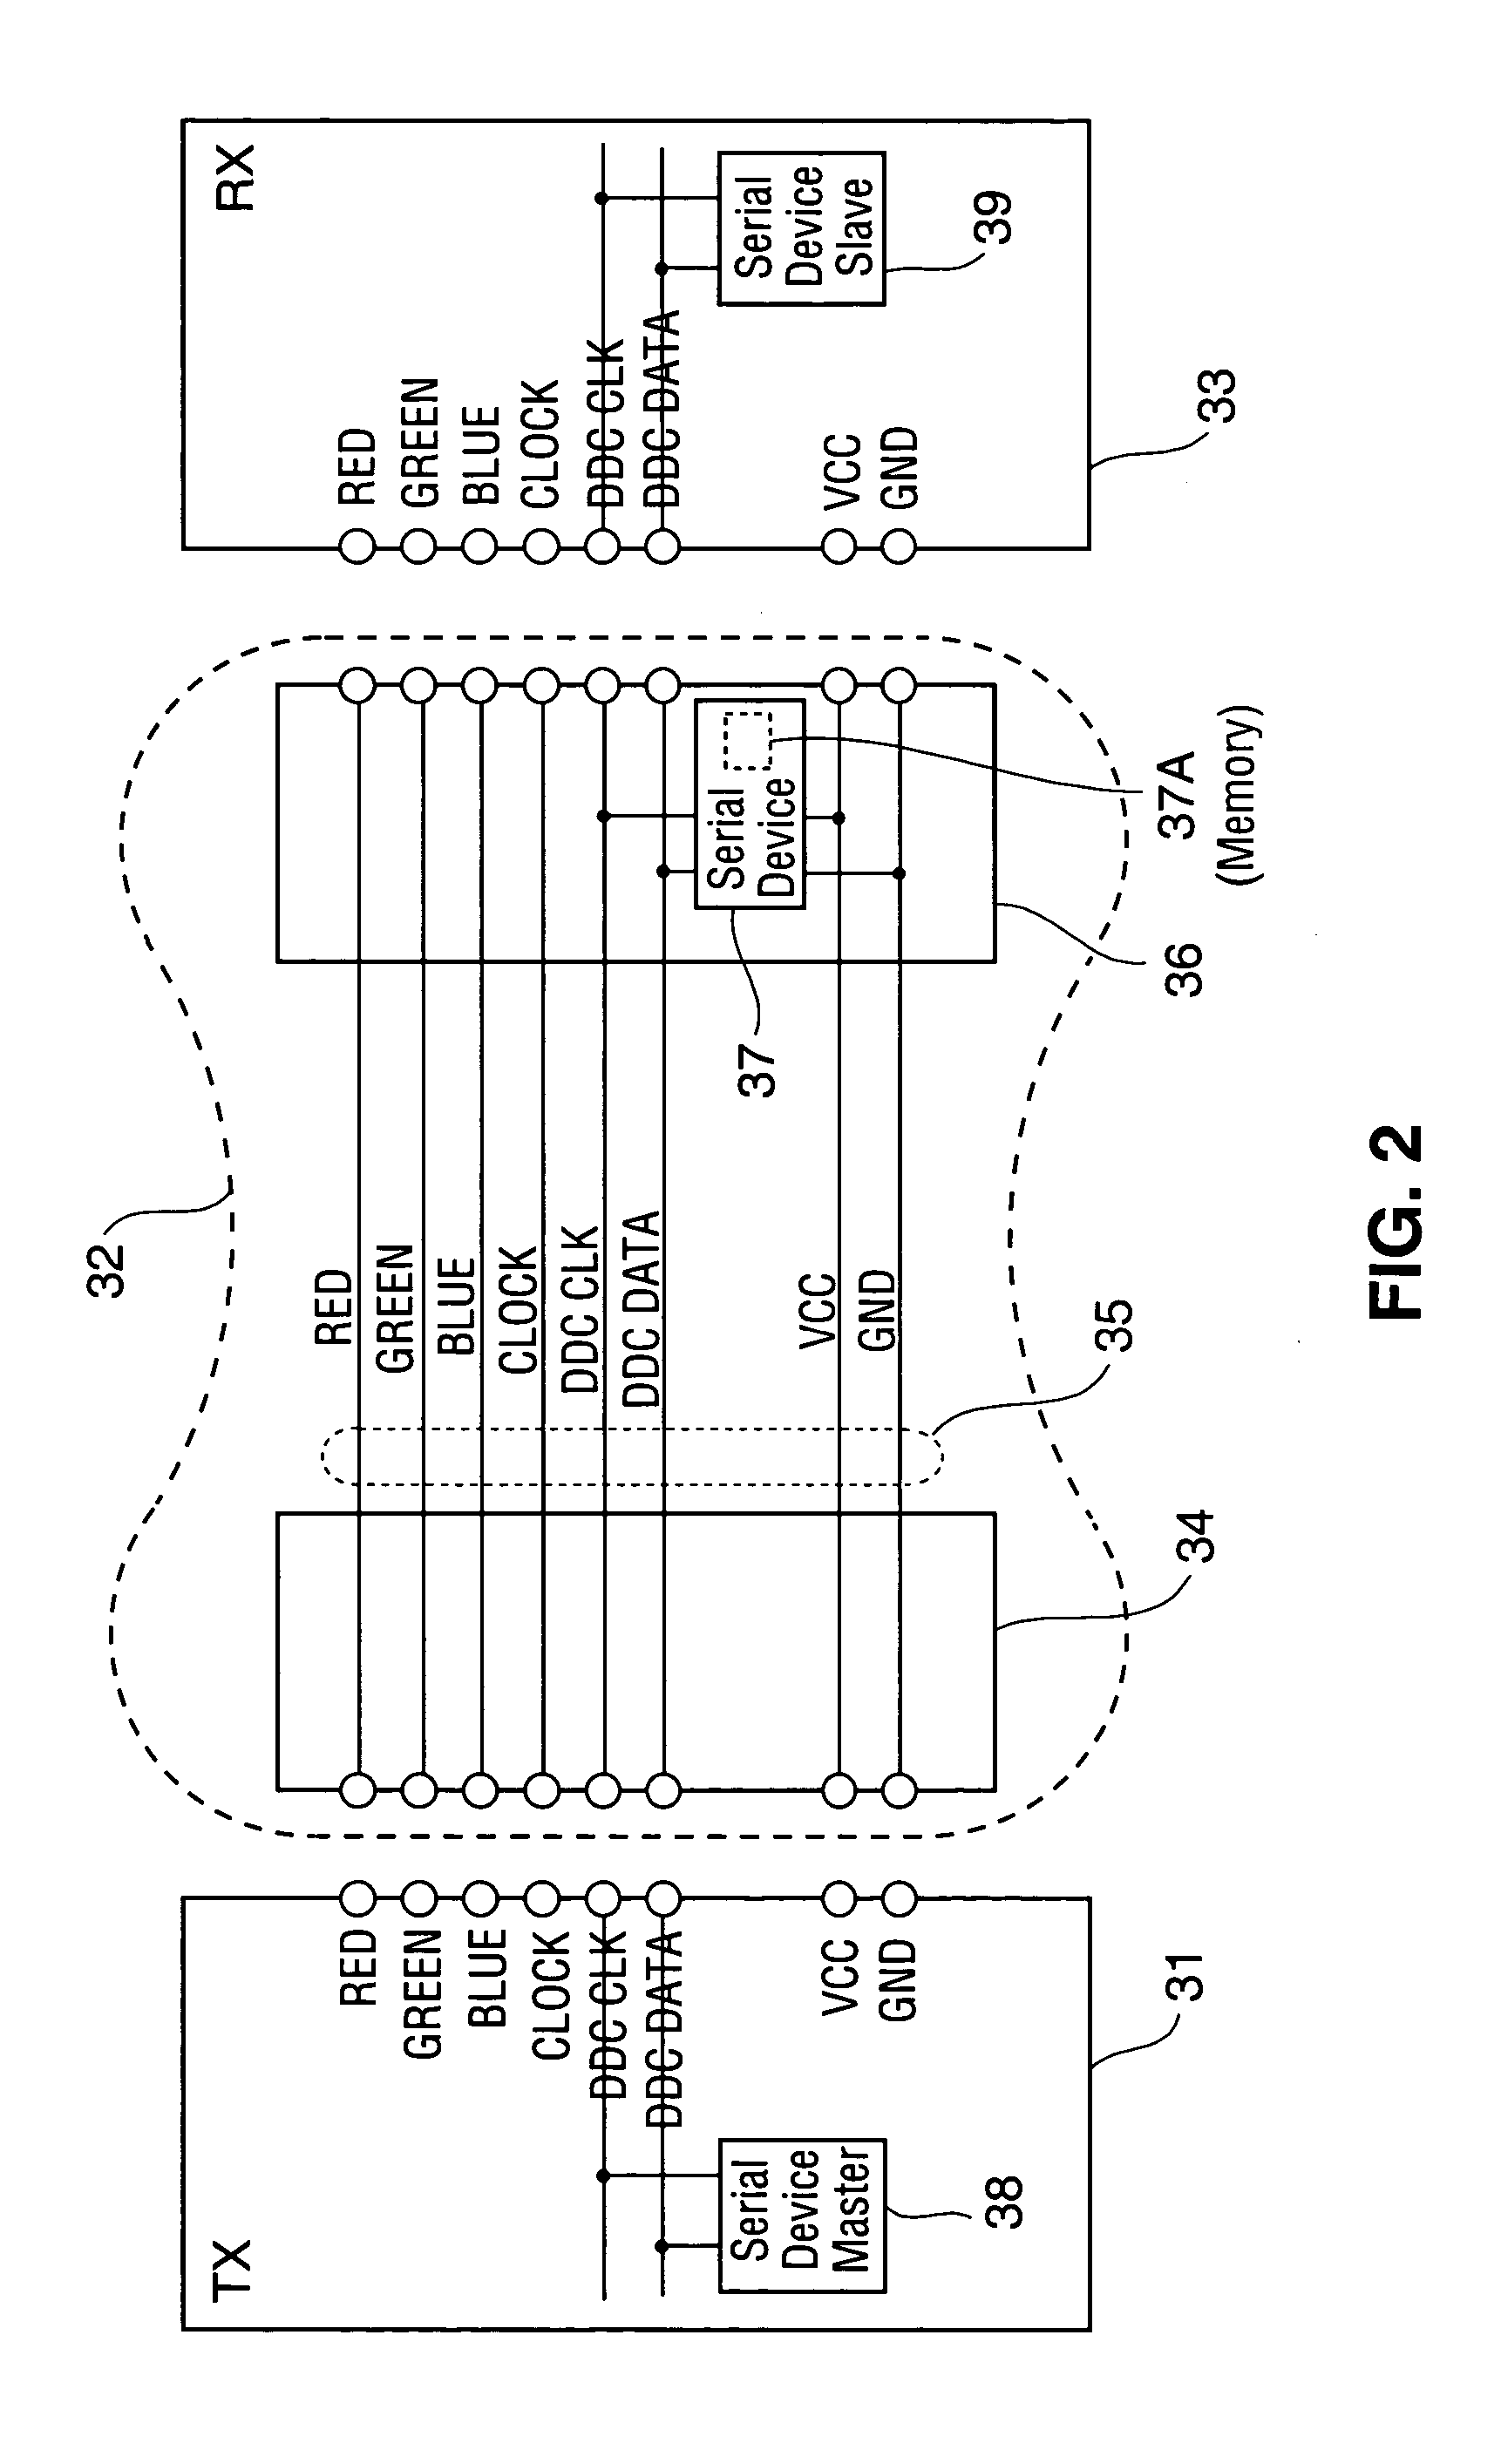 Cable with circuitry for asserting stored cable data or other information to an external device or user